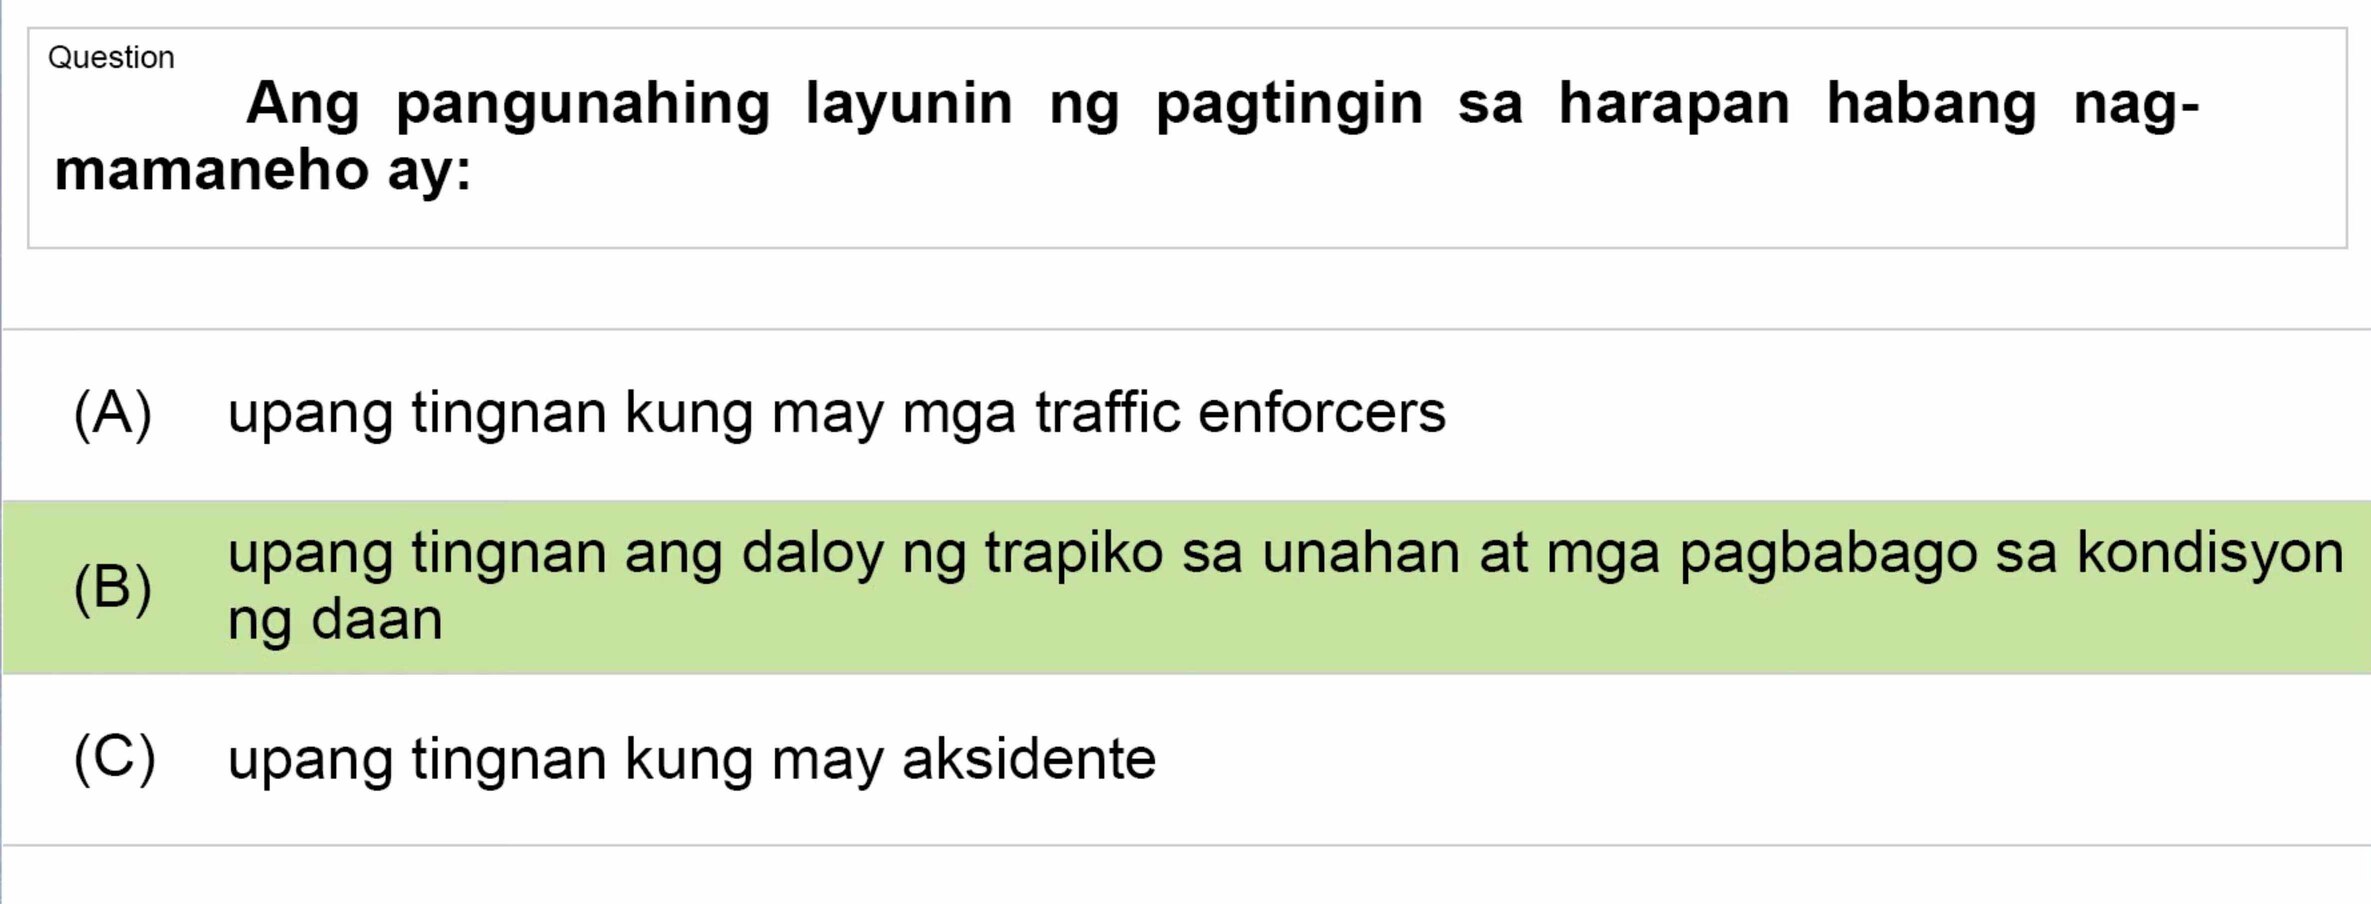 LTO Tagalog non professional exam reviewer motorcycle 1 (48)